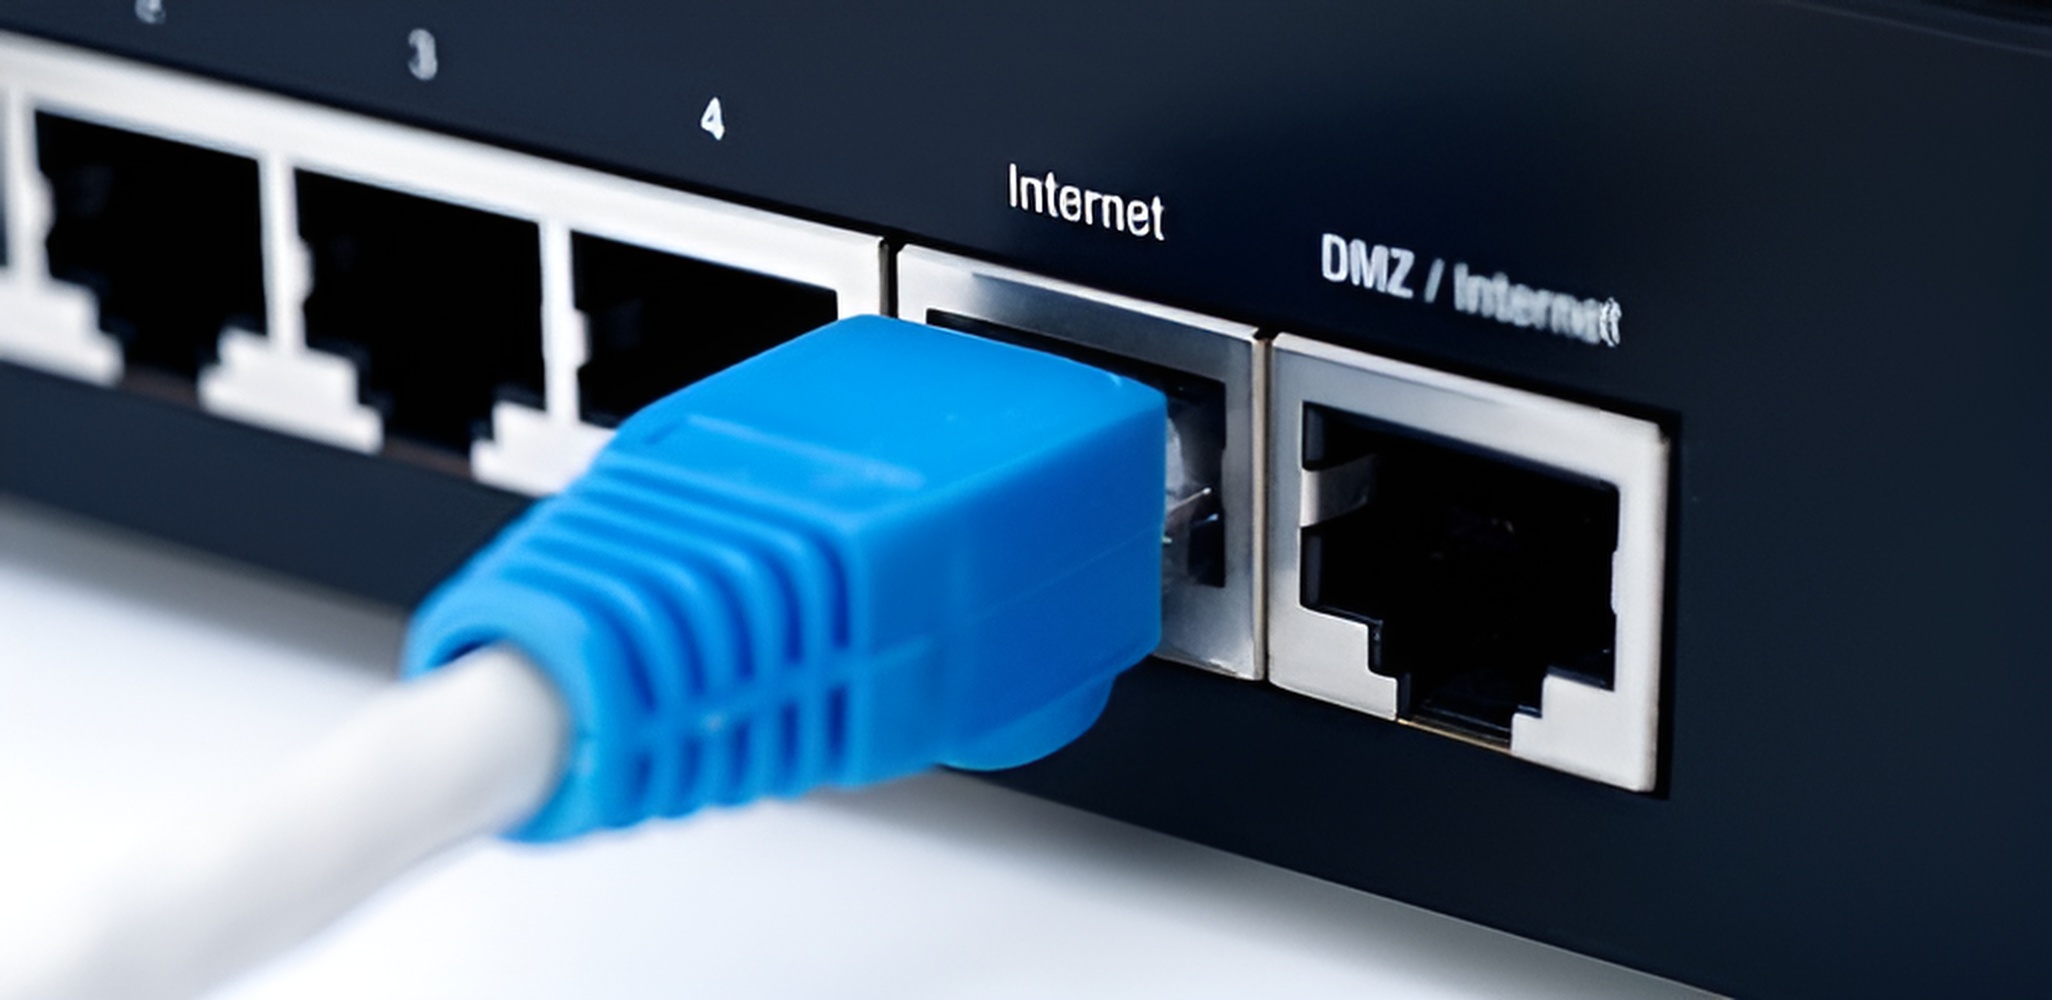 Connecting ethernet cable to the internet port of the router